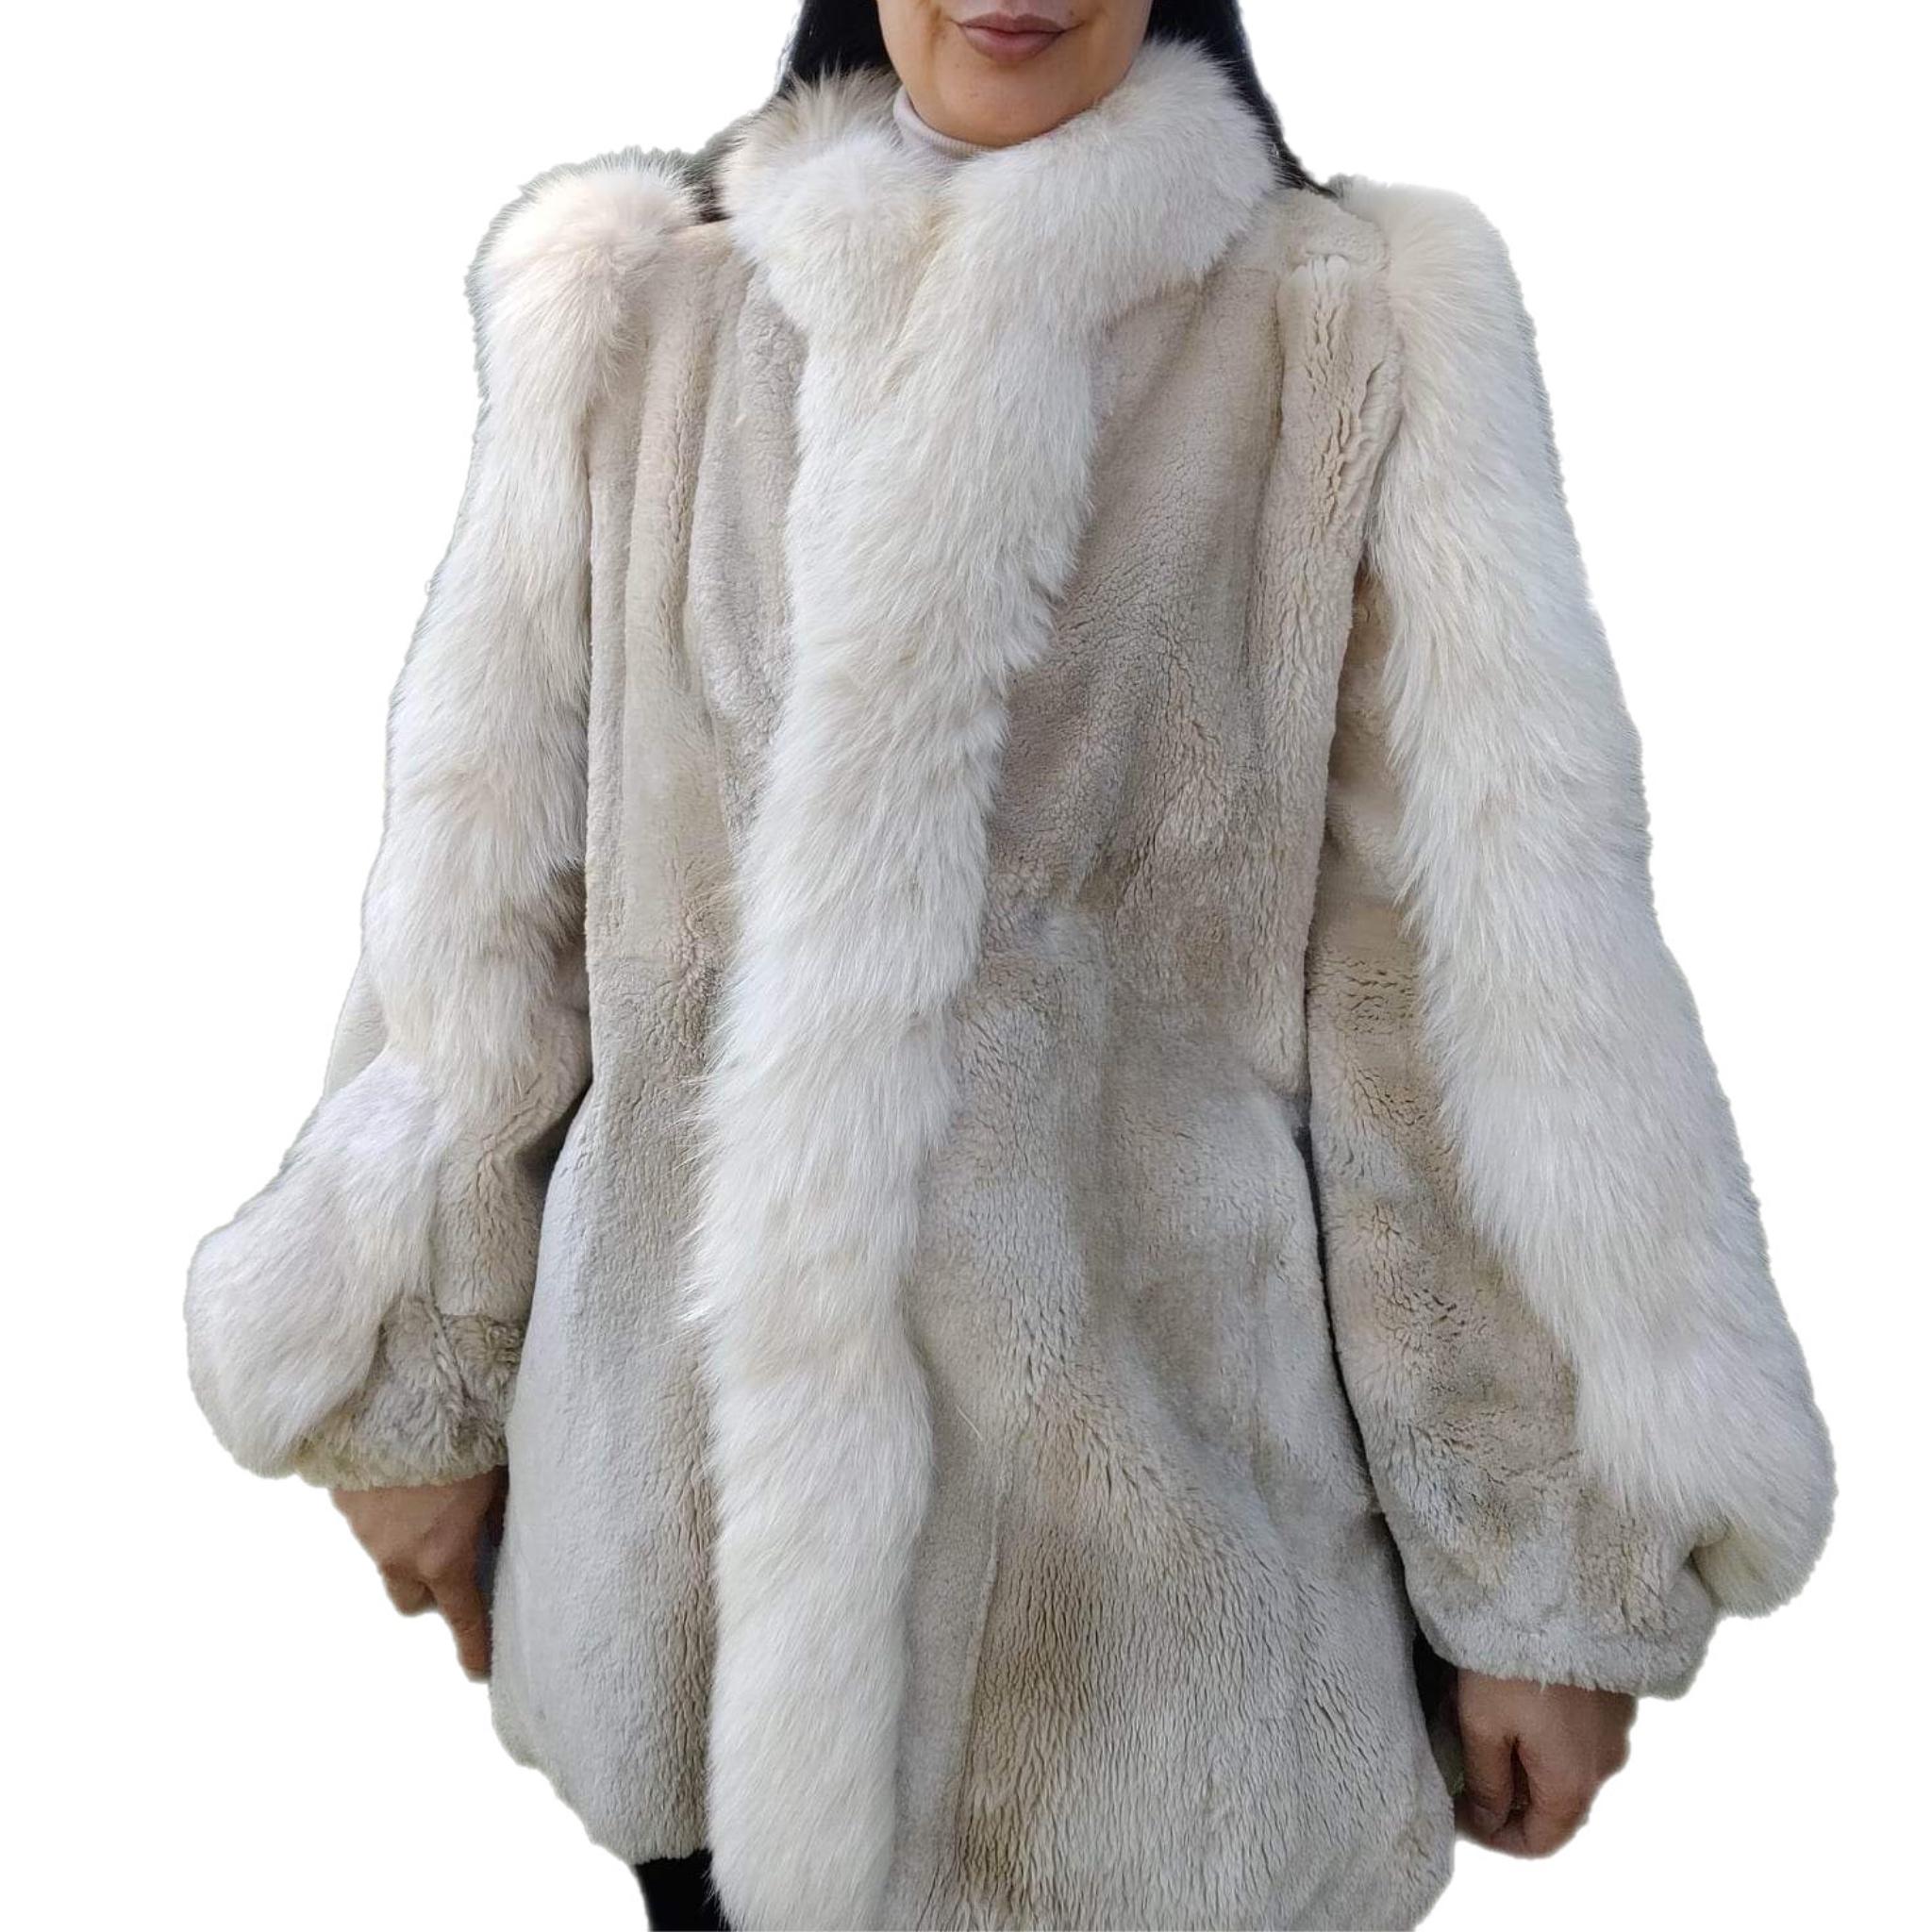 PRODUCT DESCRIPTION:

Sheared Beaver Fur Coat with Fur Trim (Size 8-M)

Condition: good 

Closure: Hooks & Eyes

Color: Cream, beige

Material: Sheared Beaver

Garment type: short jacket

Sleeves: Dolman with bracelet cuff

Pockets: Two side